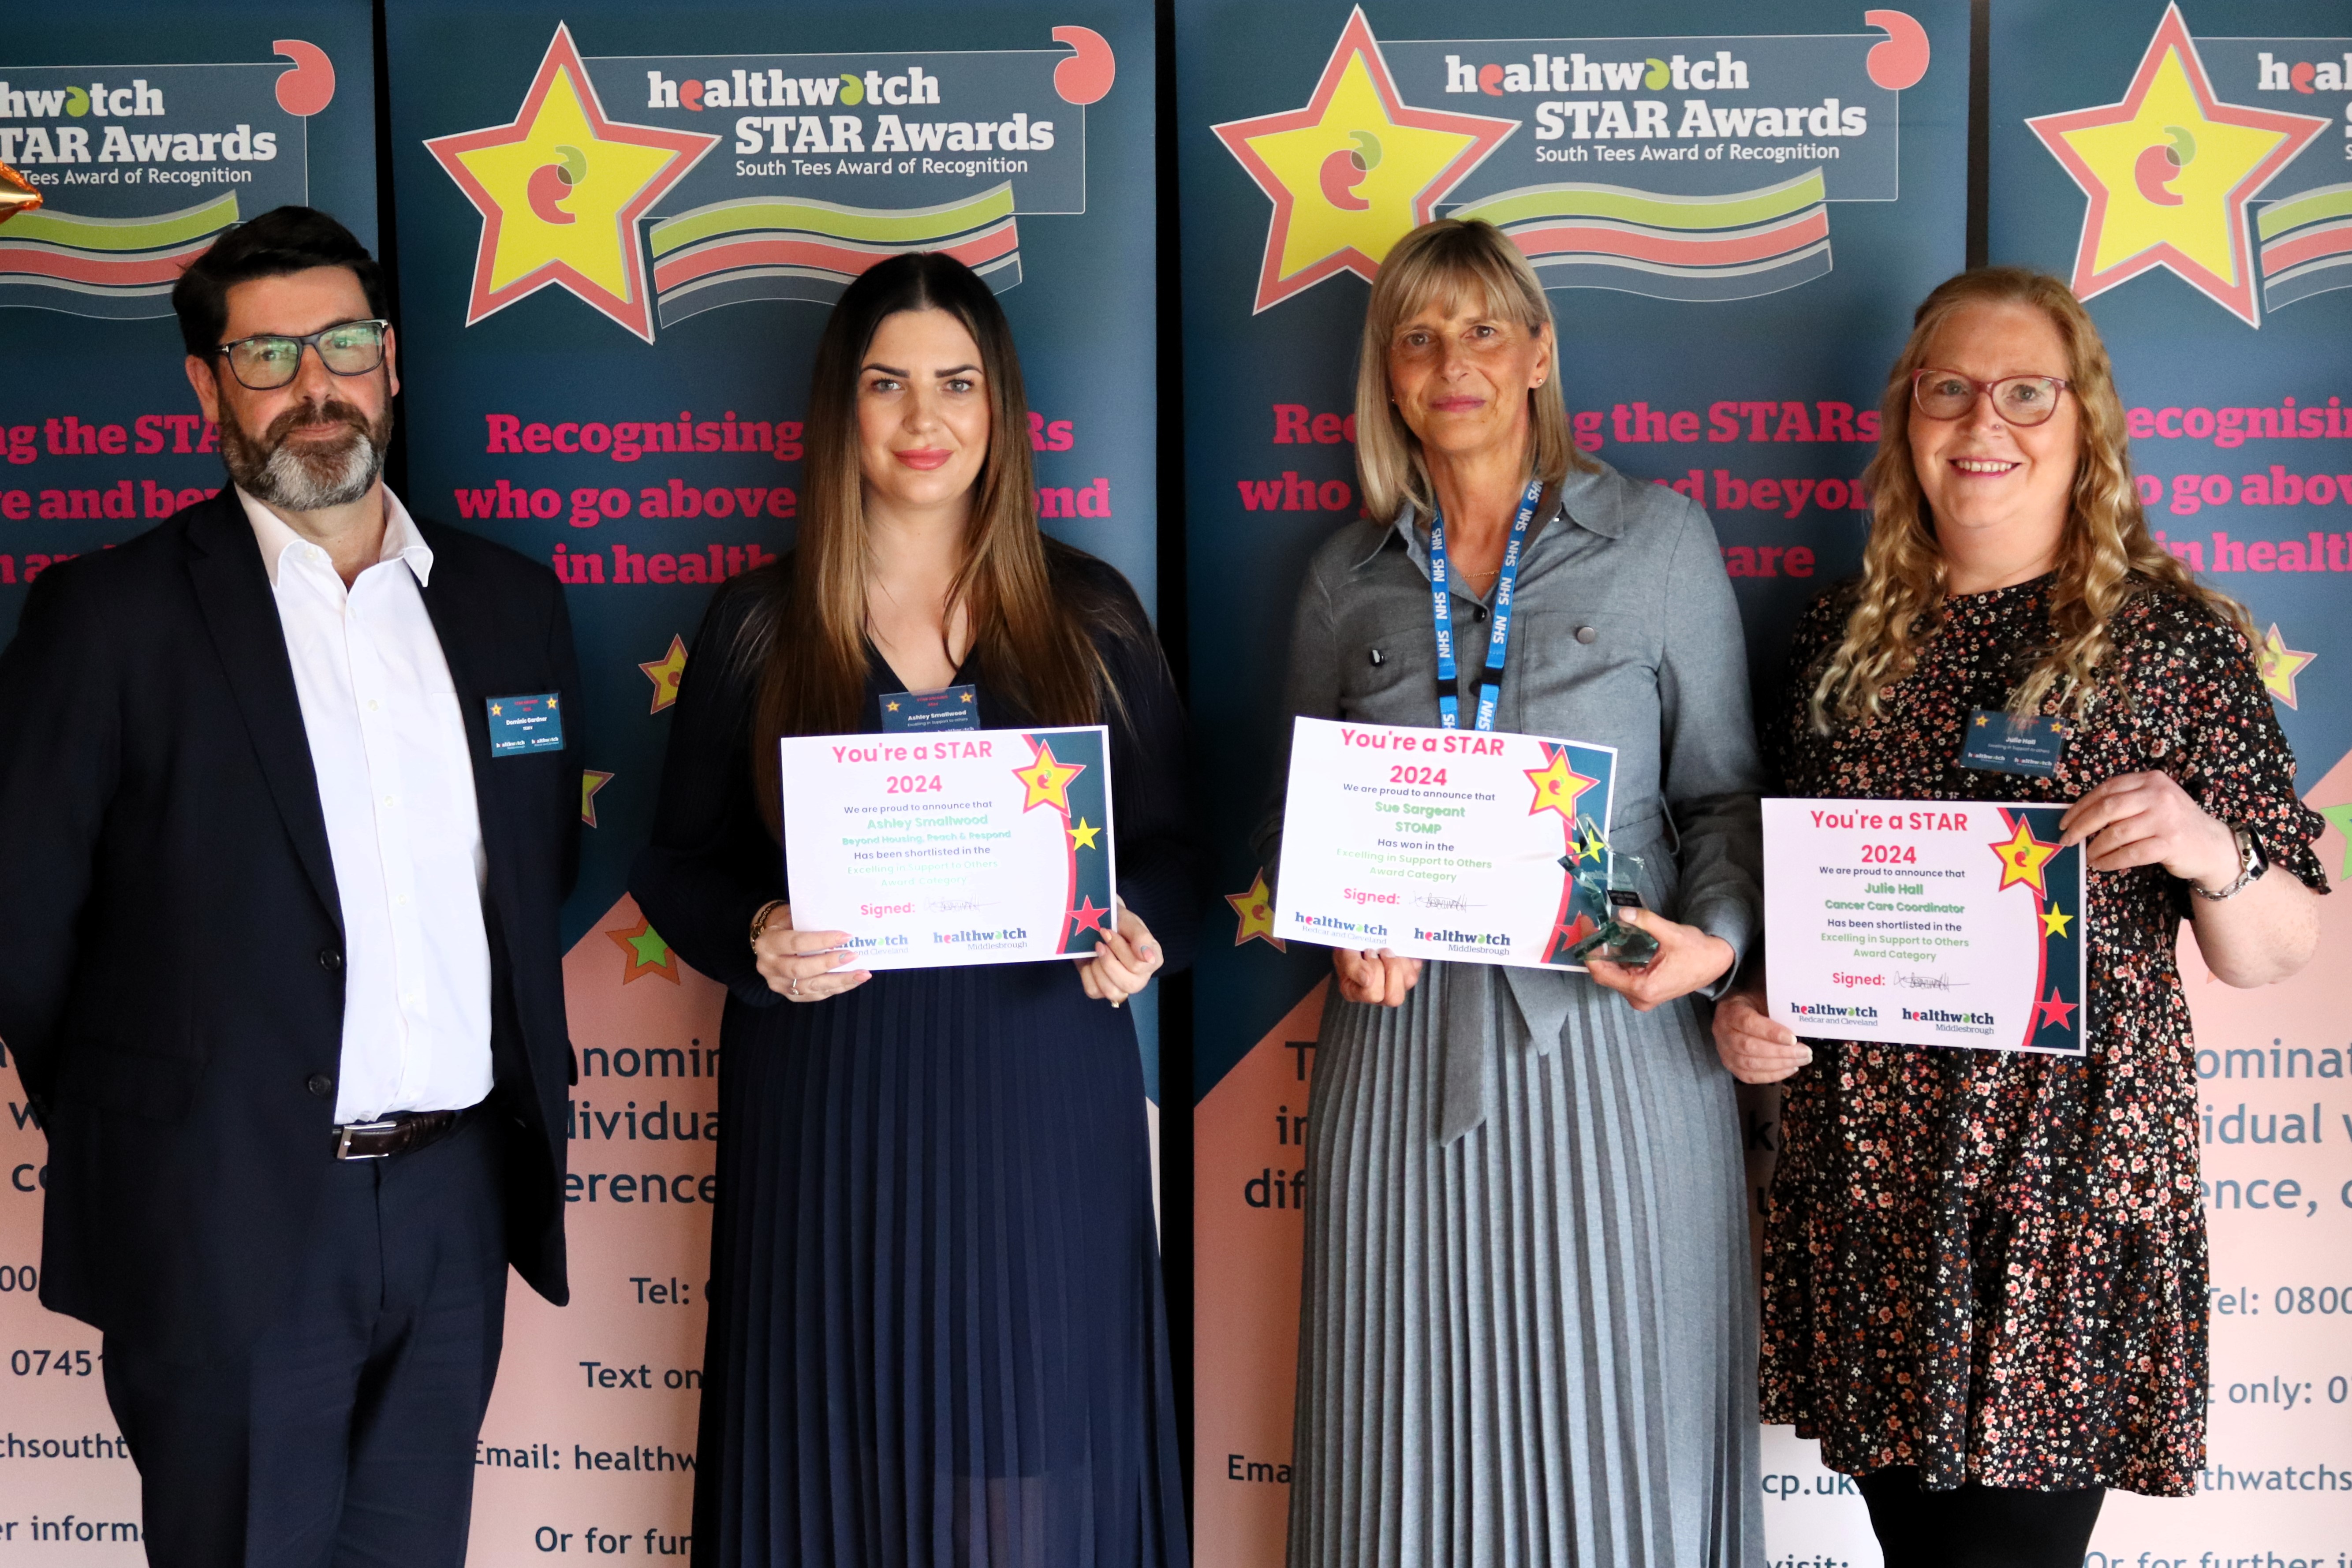 Winners from excelling in support of others award